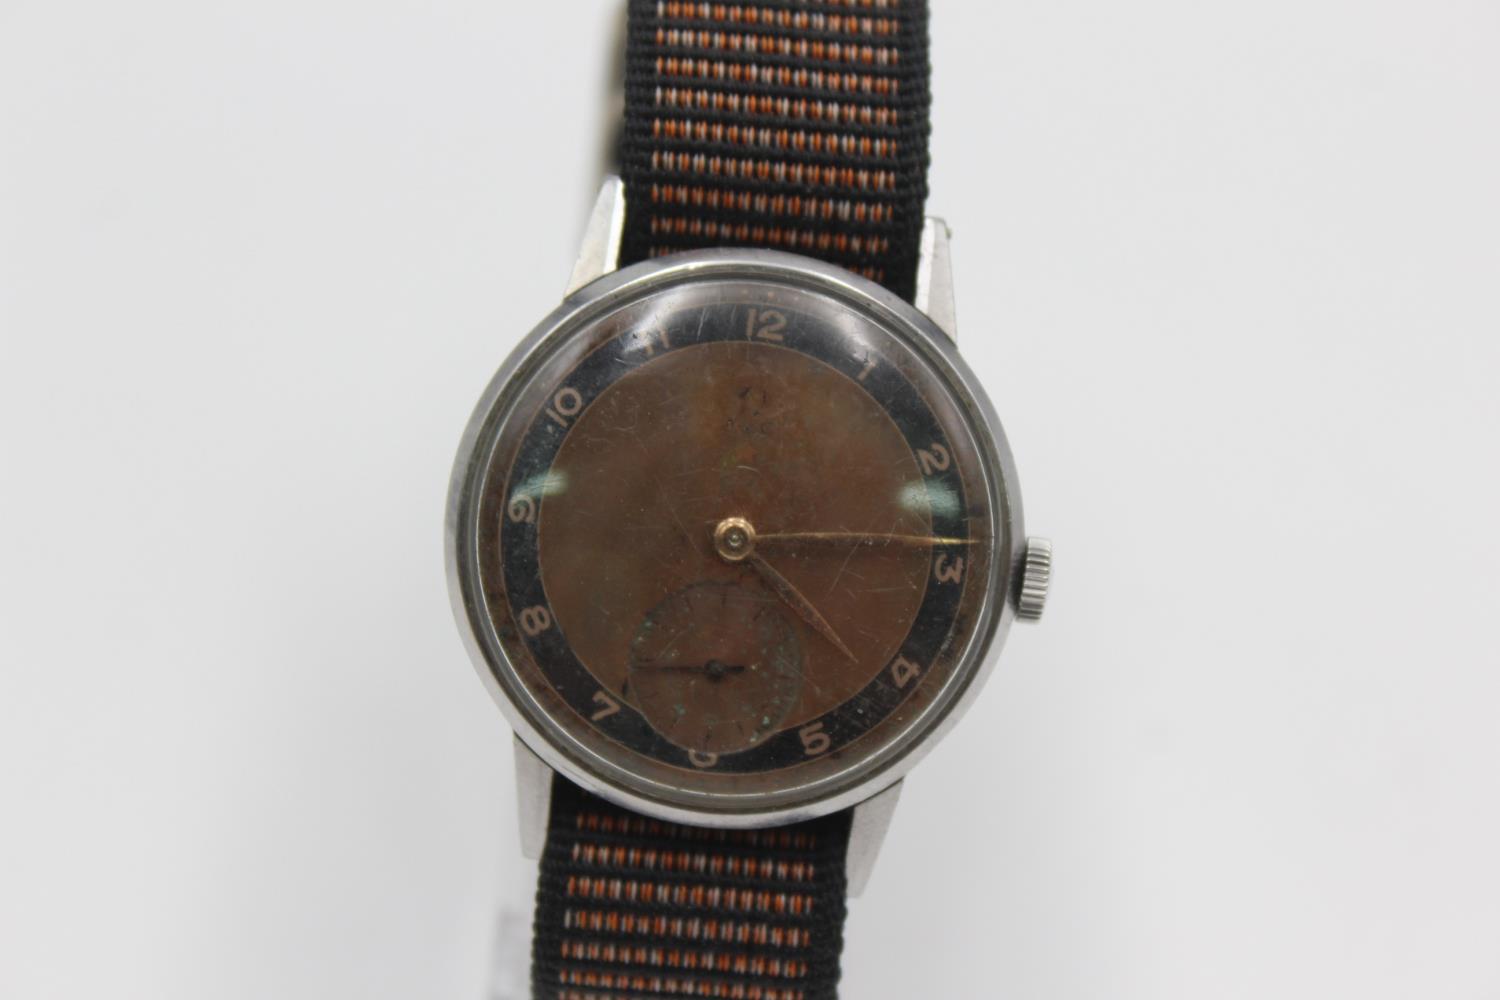 Vintage Gents OMEGA Military Style WRISTWATCH Hand-Wind WORKING Vintage Gents OMEGA Military Style - Image 2 of 4